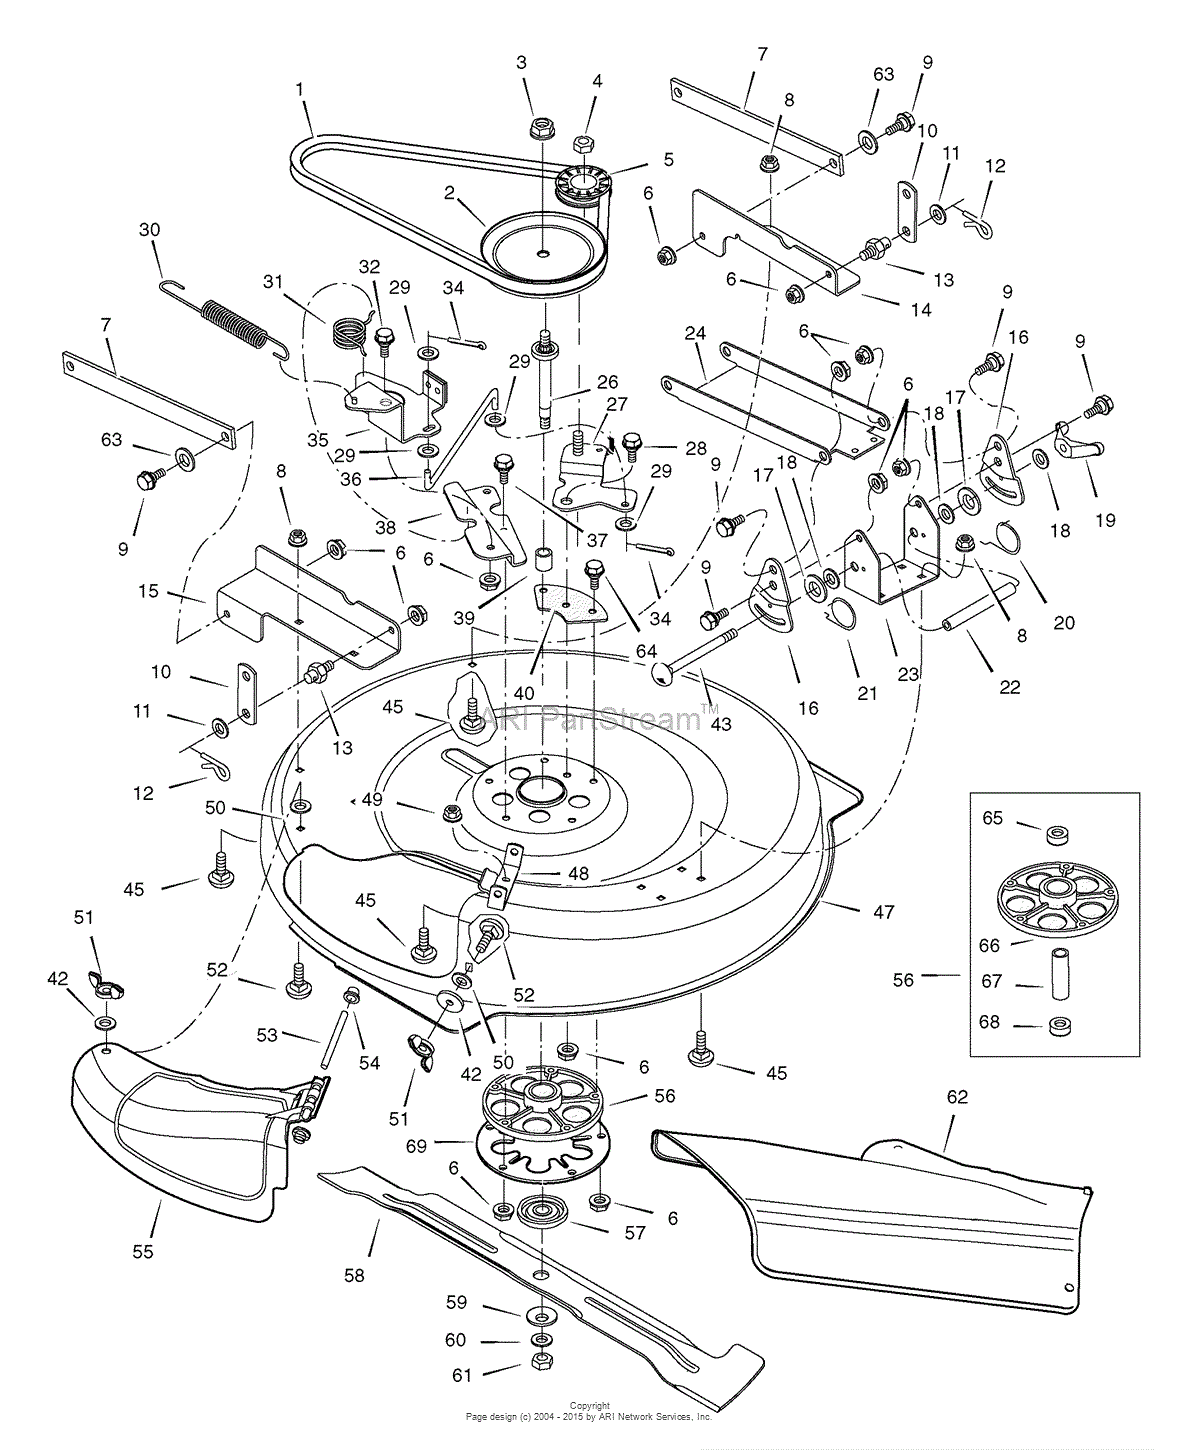 Murray 309029x11E - 10/30, Heritage Tractor (2007) Parts Diagram for ...